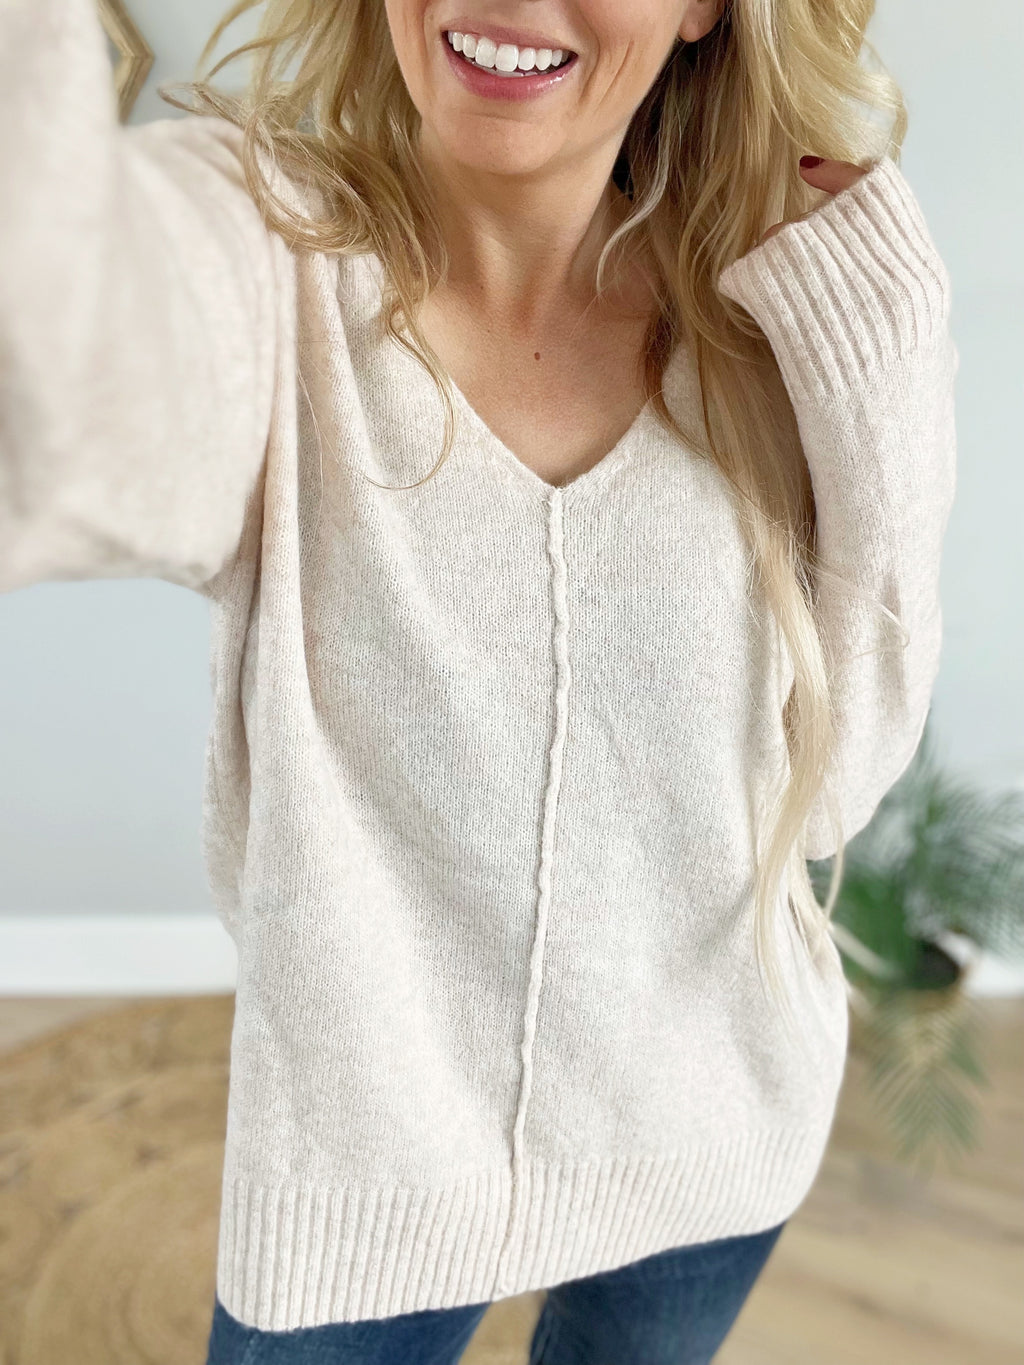 Dead Serious Sweater in Oatmeal